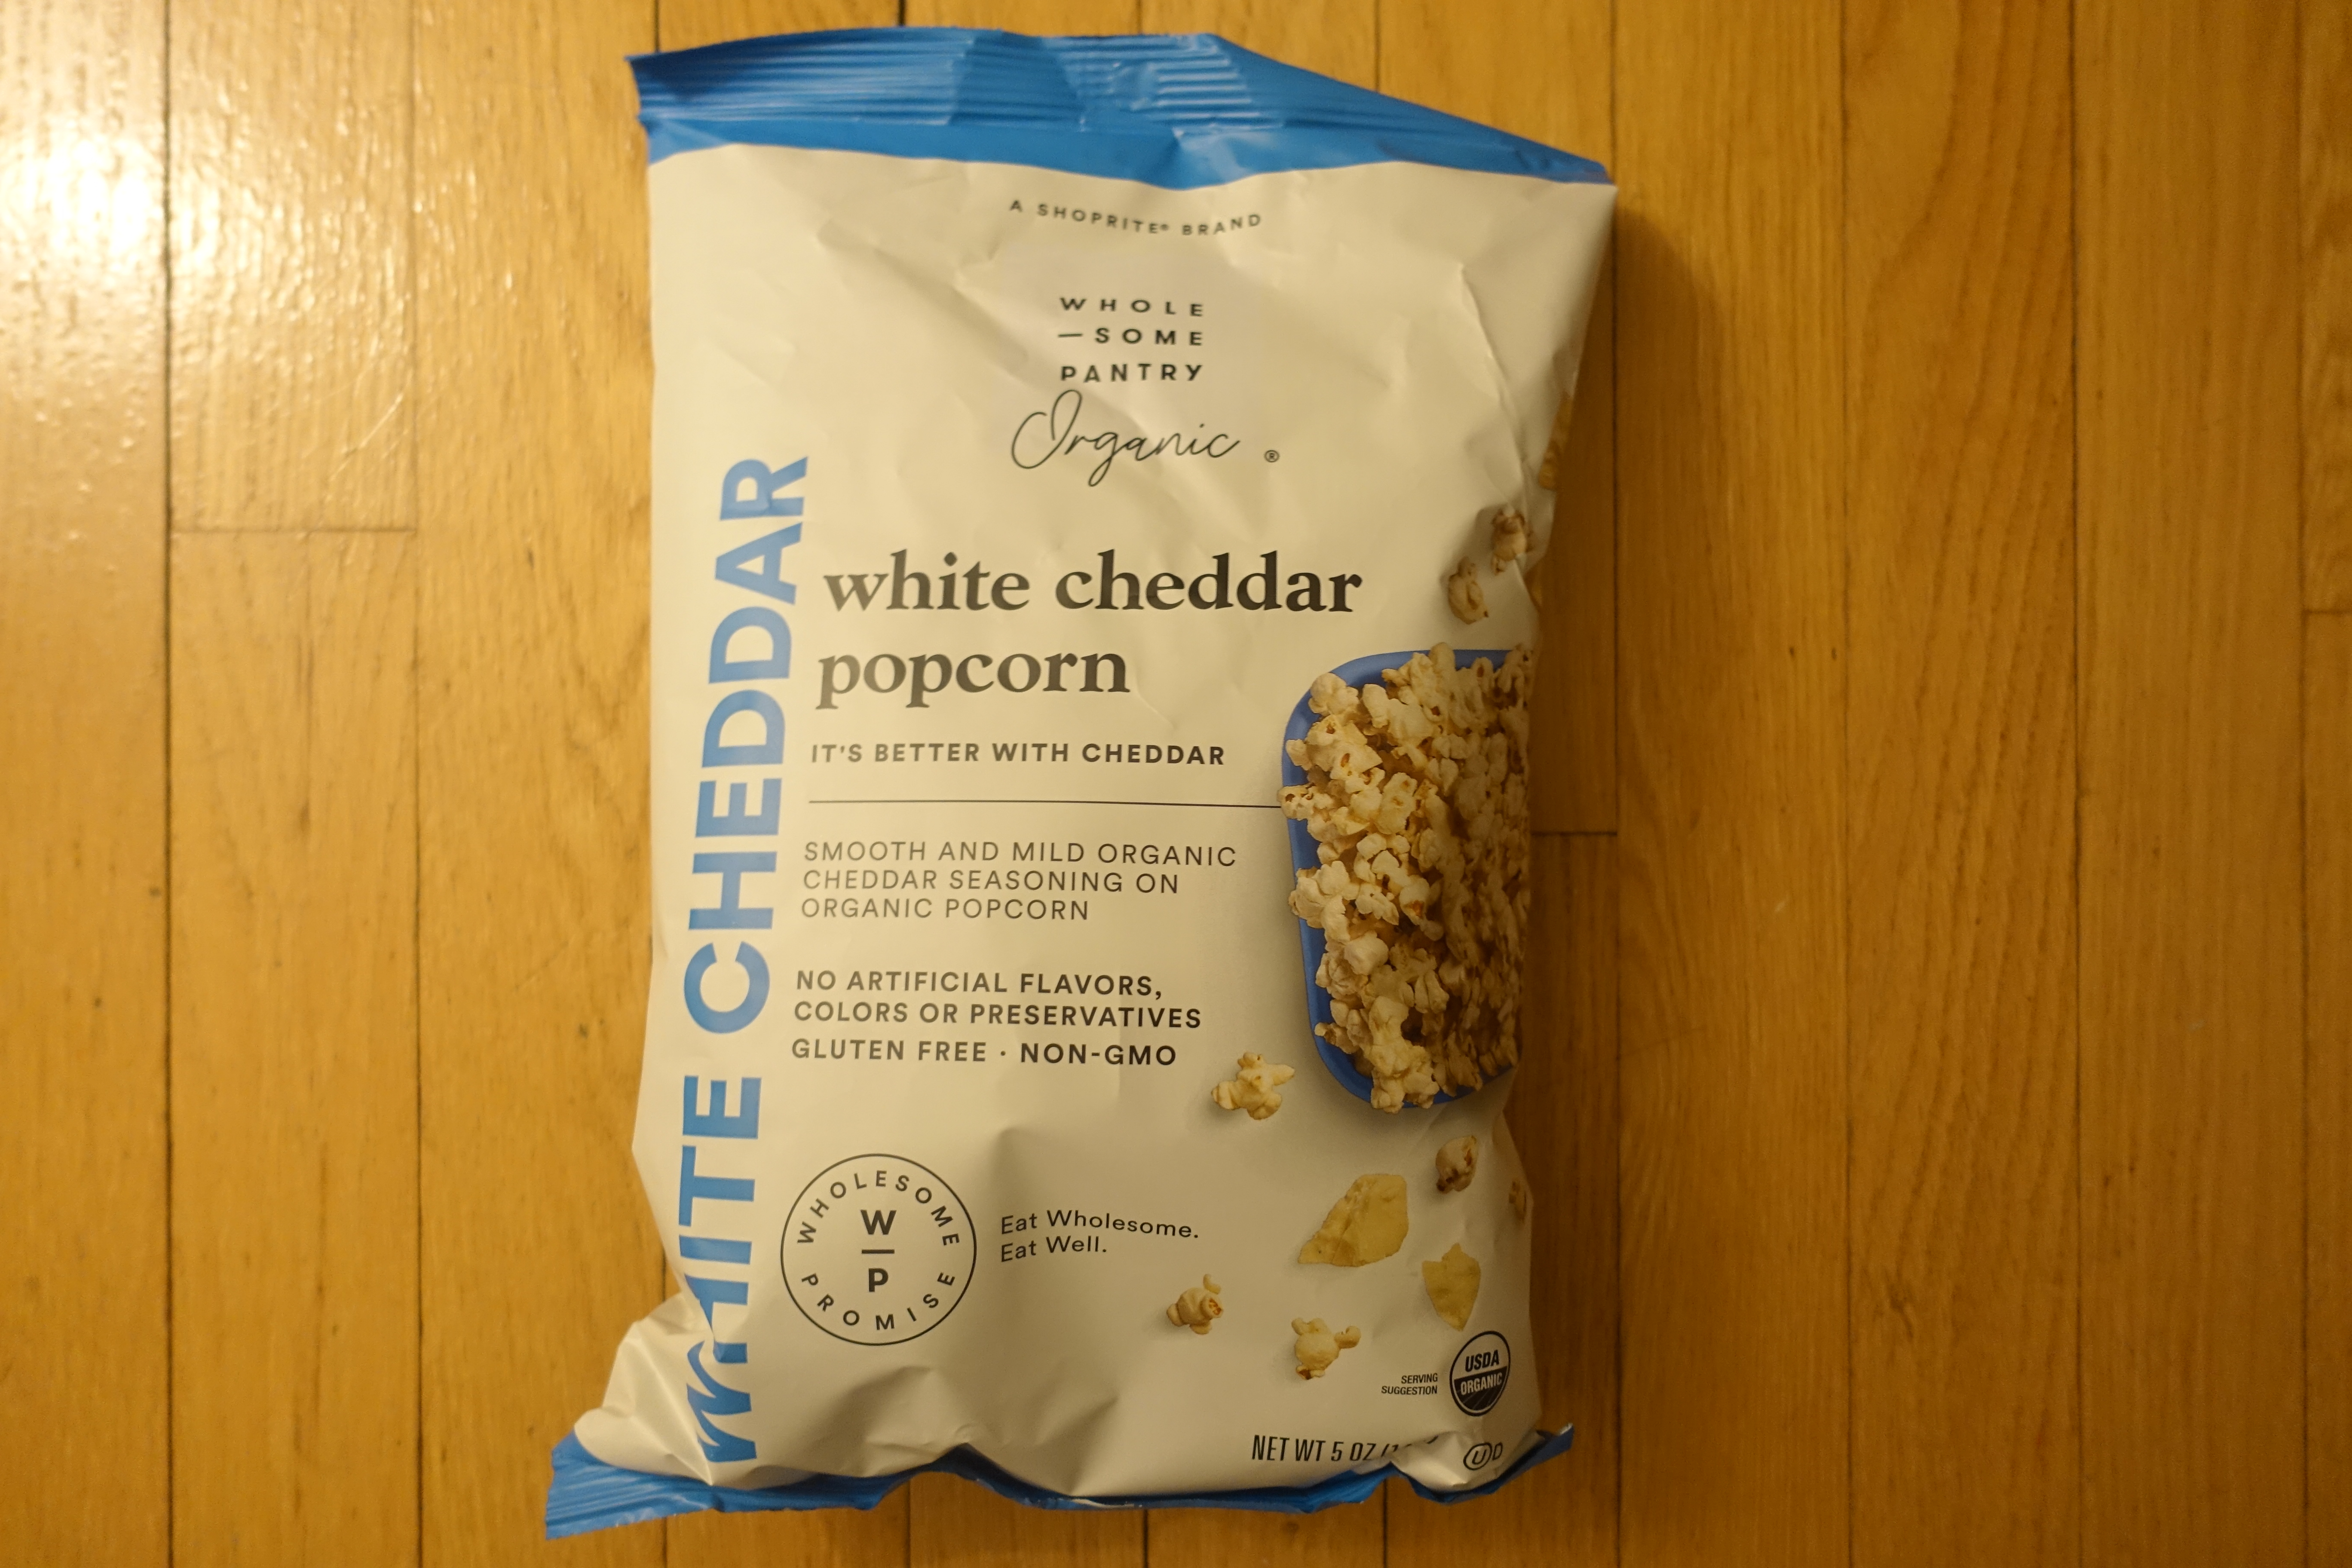 Wholesome Pantry White Cheddar